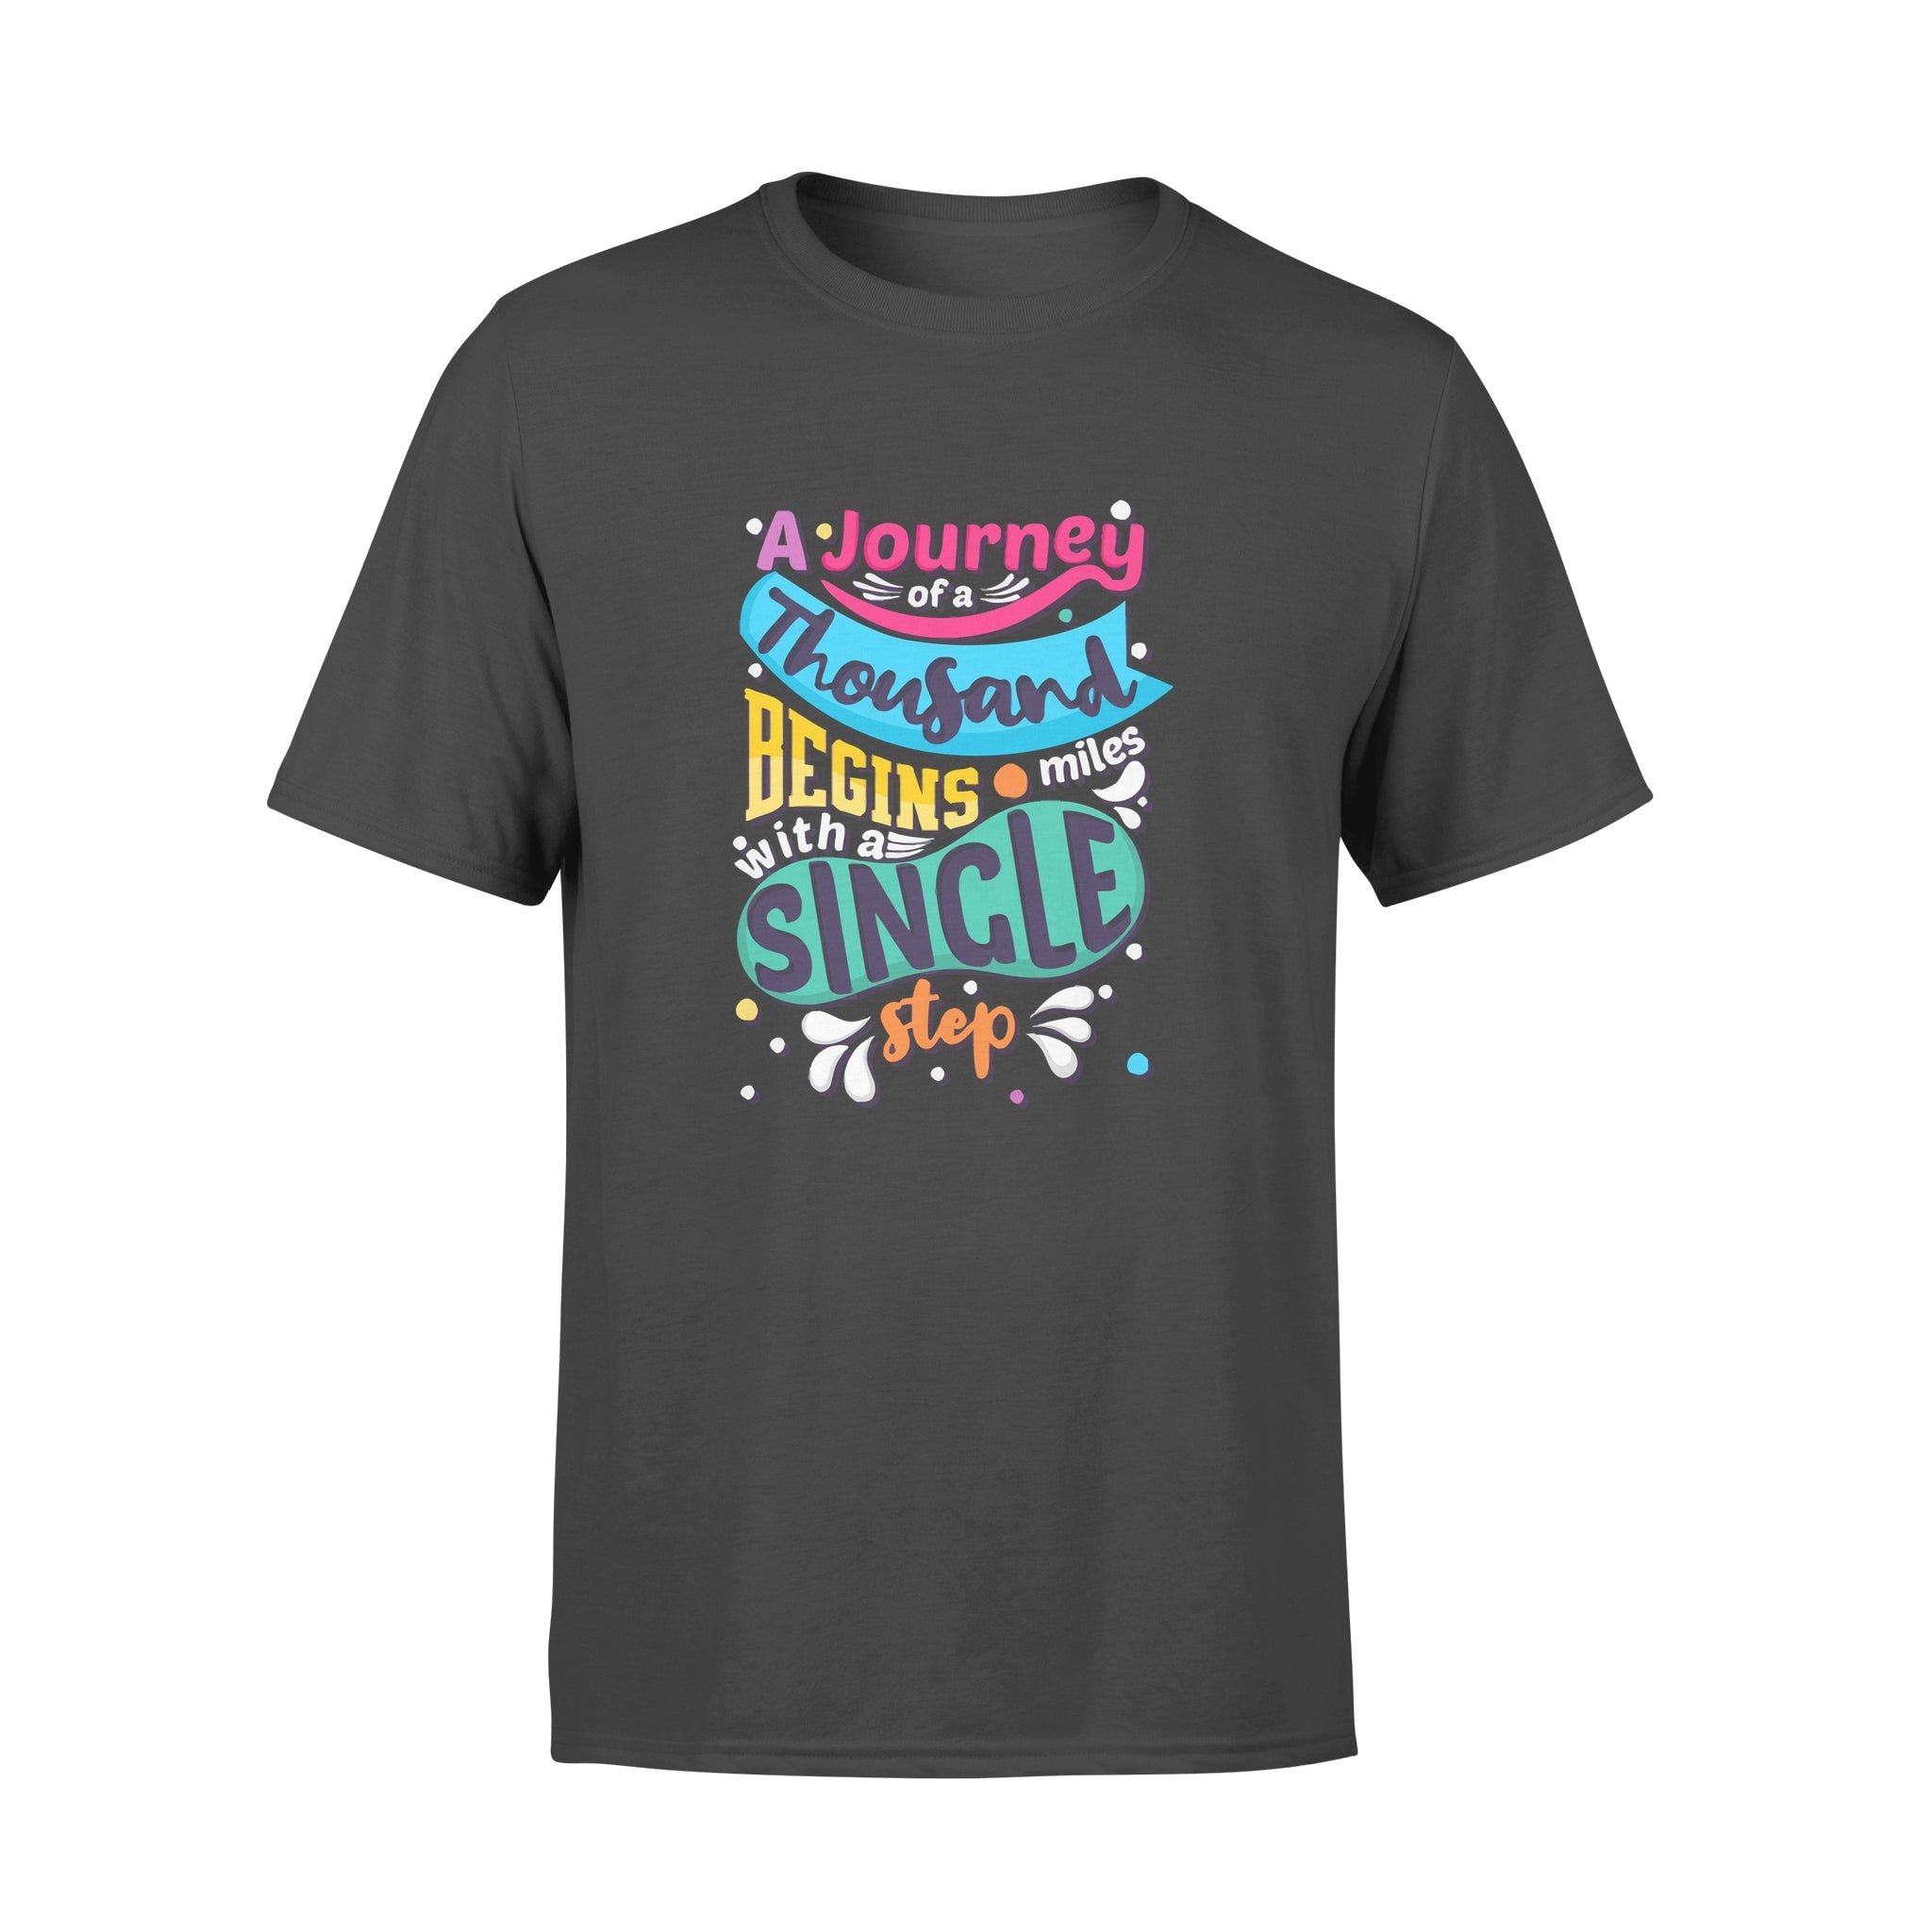 Aj Journey of a Thousand Miles Begins with a Single Step - T-shirt